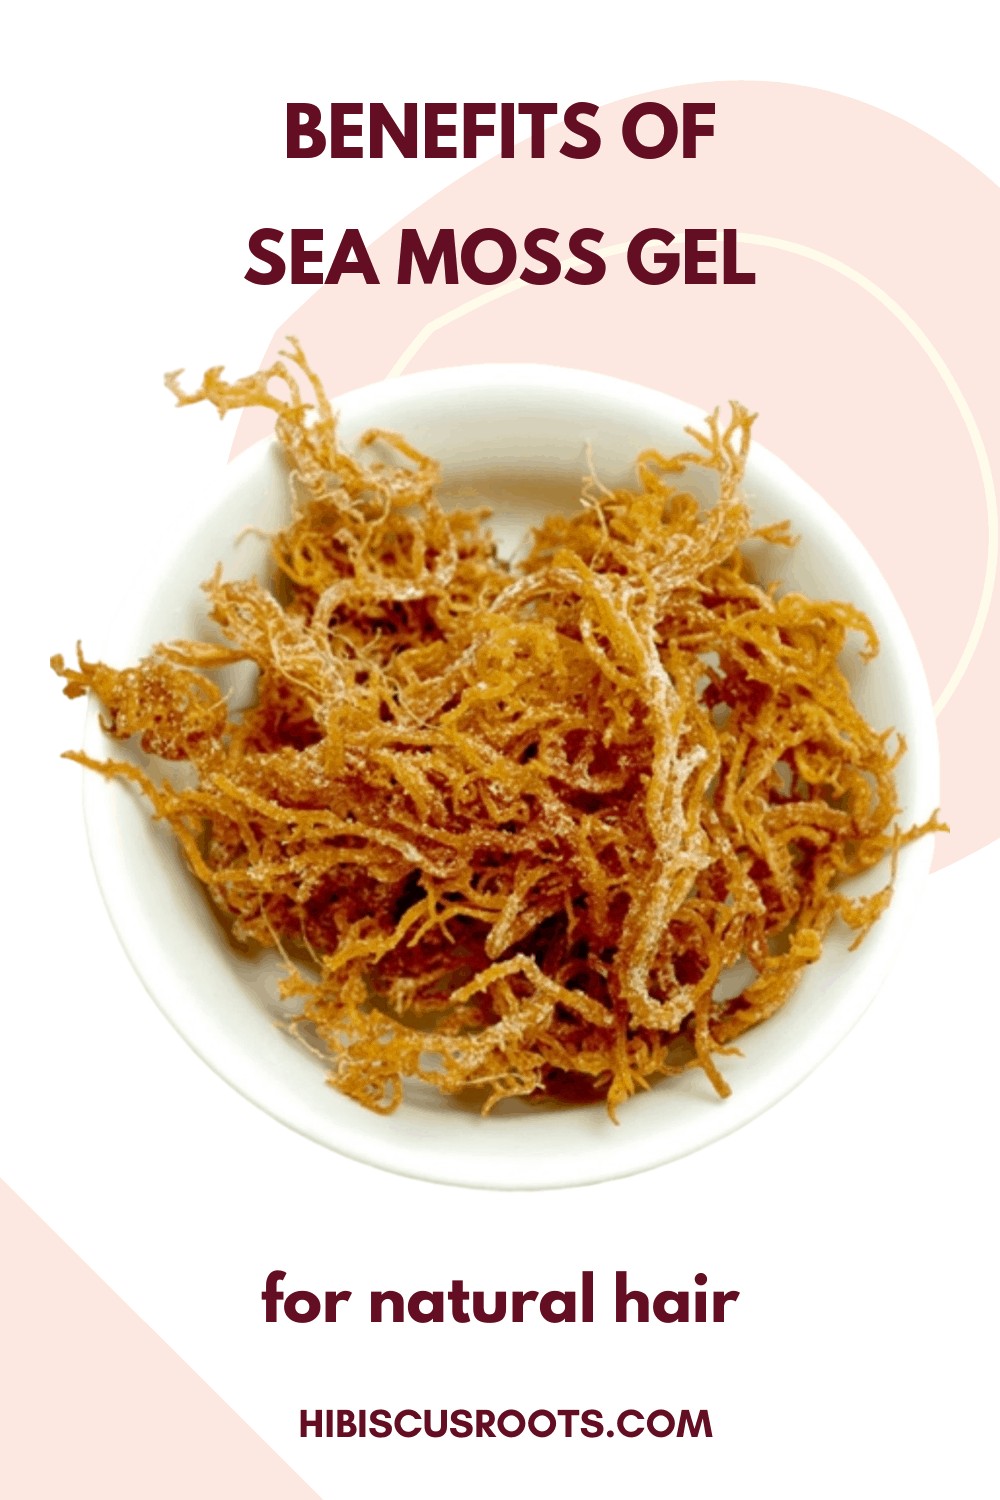 The Incredible Benefits of Sea Moss Gel for Natural Hair!